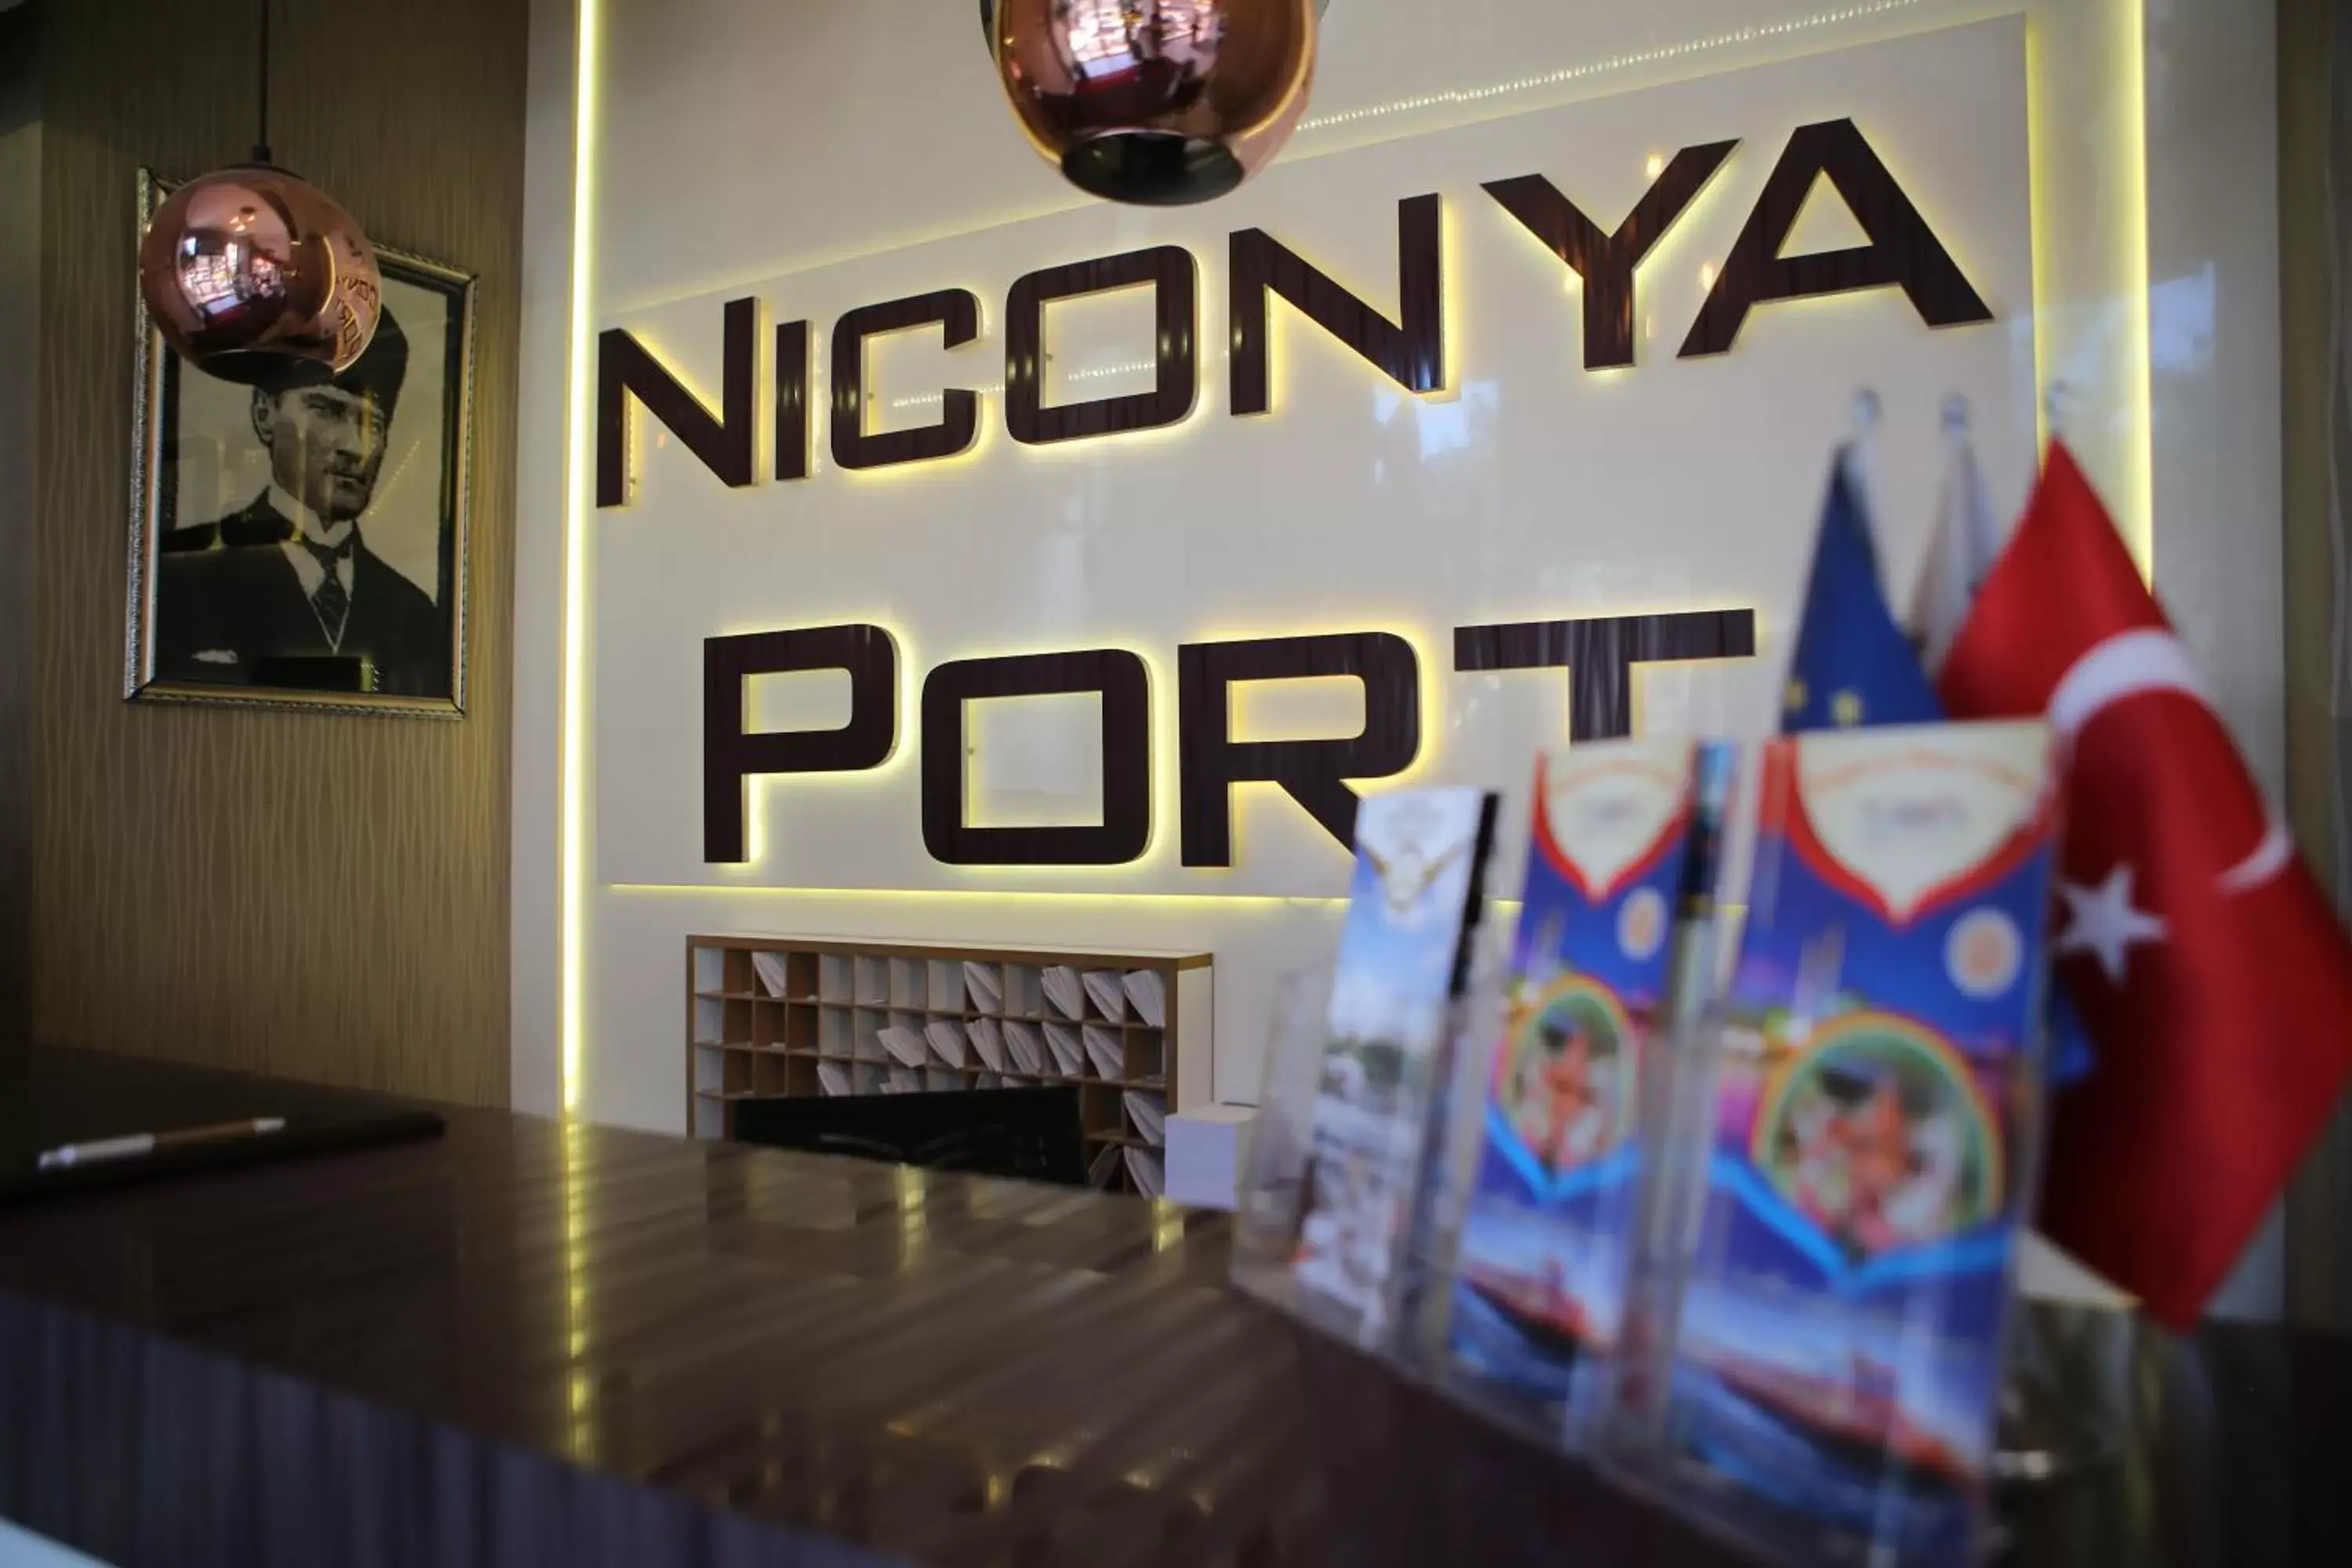 Property logo or sign in Niconya Port Suite&Hotel